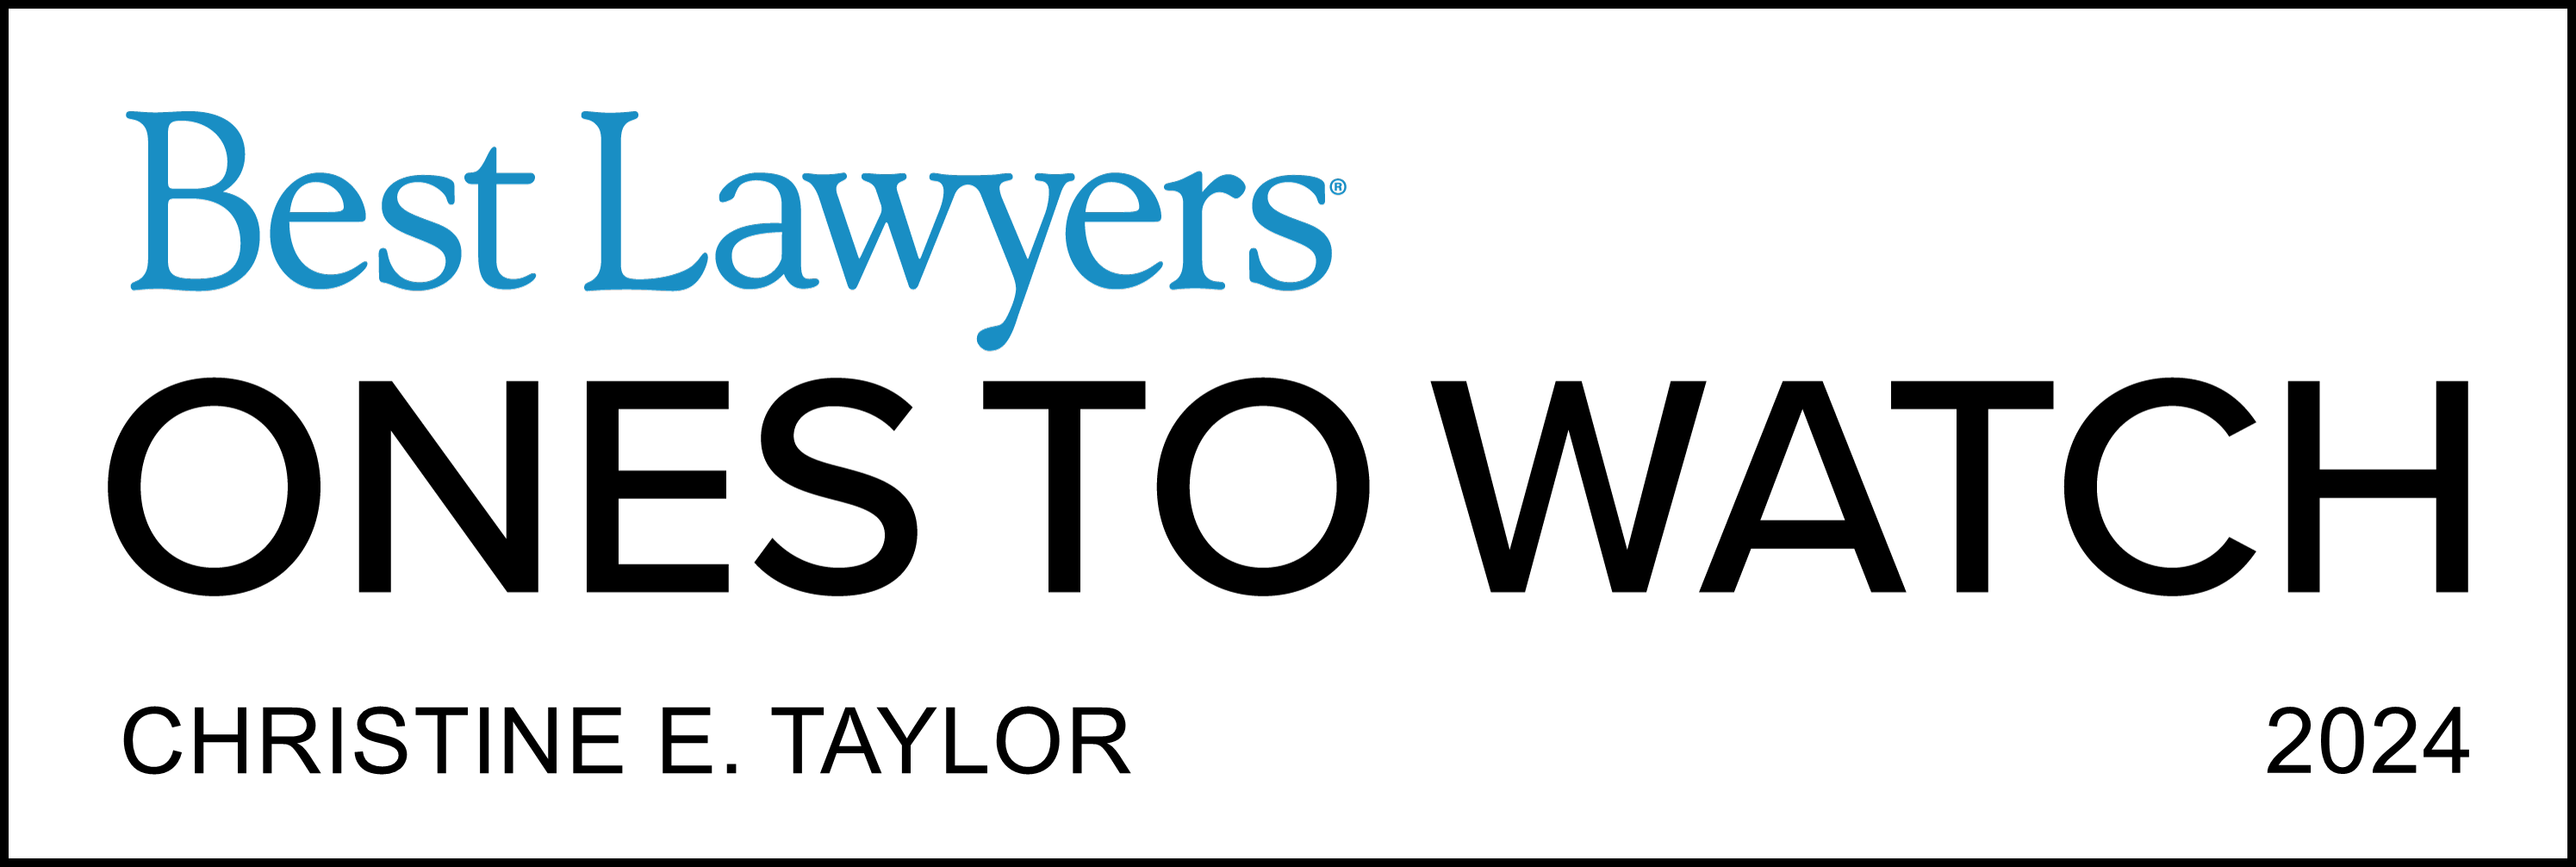 Best Lawyers Ones to watch badge